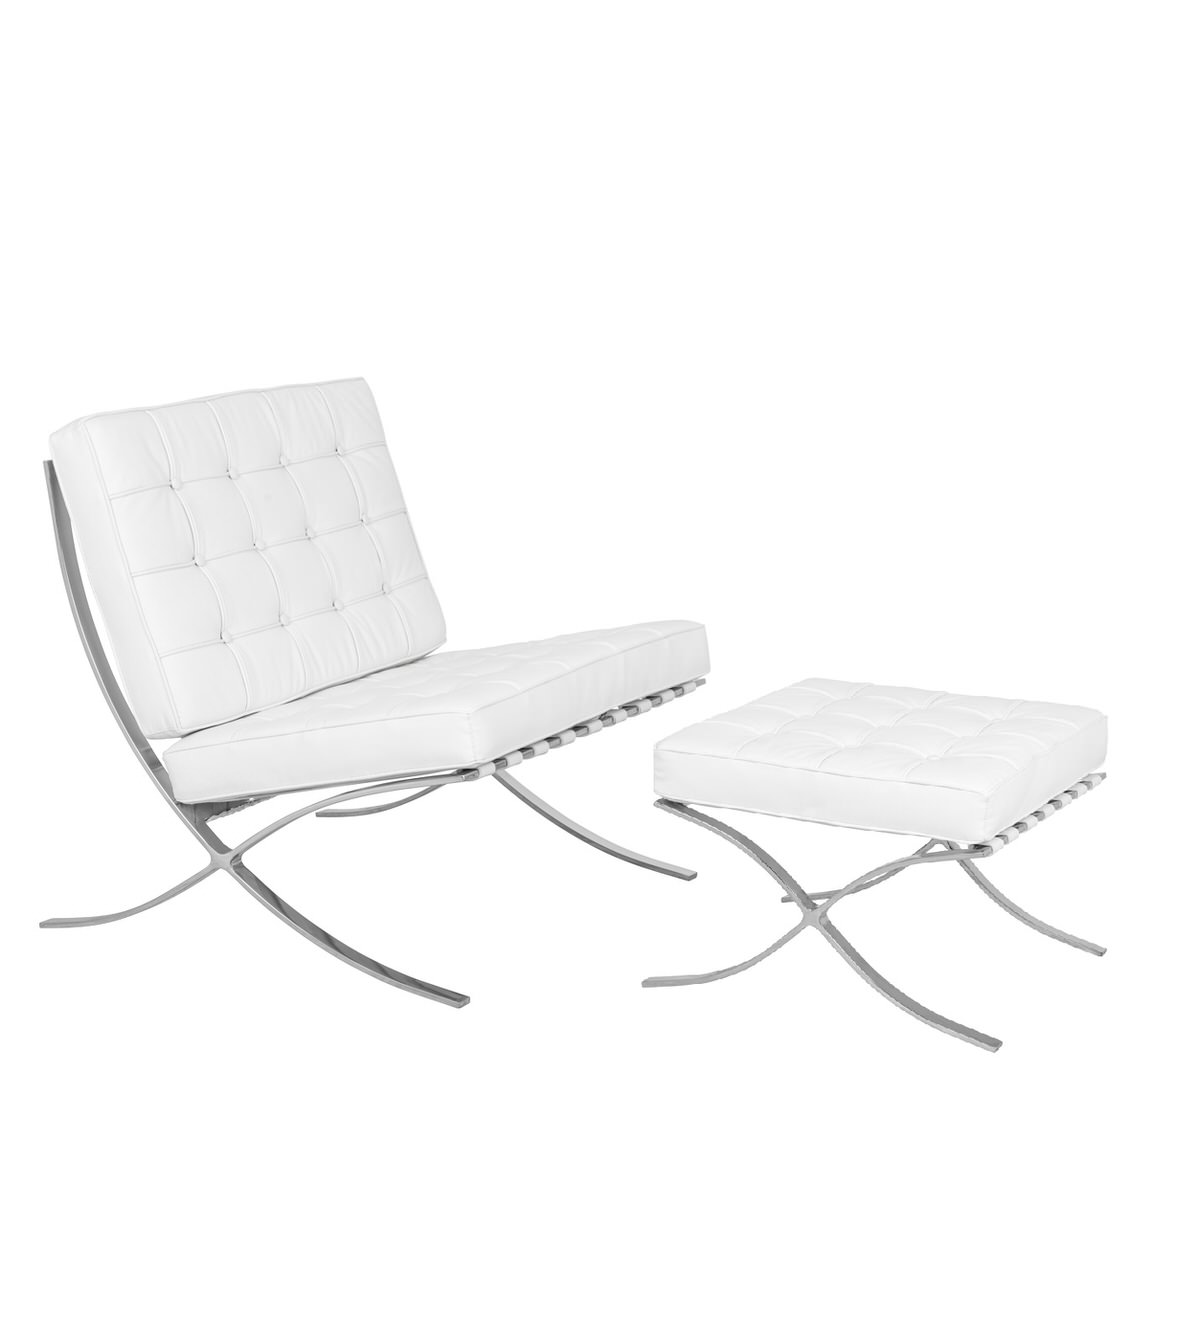 Bellefonte Style Modern Pavilion White Leather Chair Ottoman By